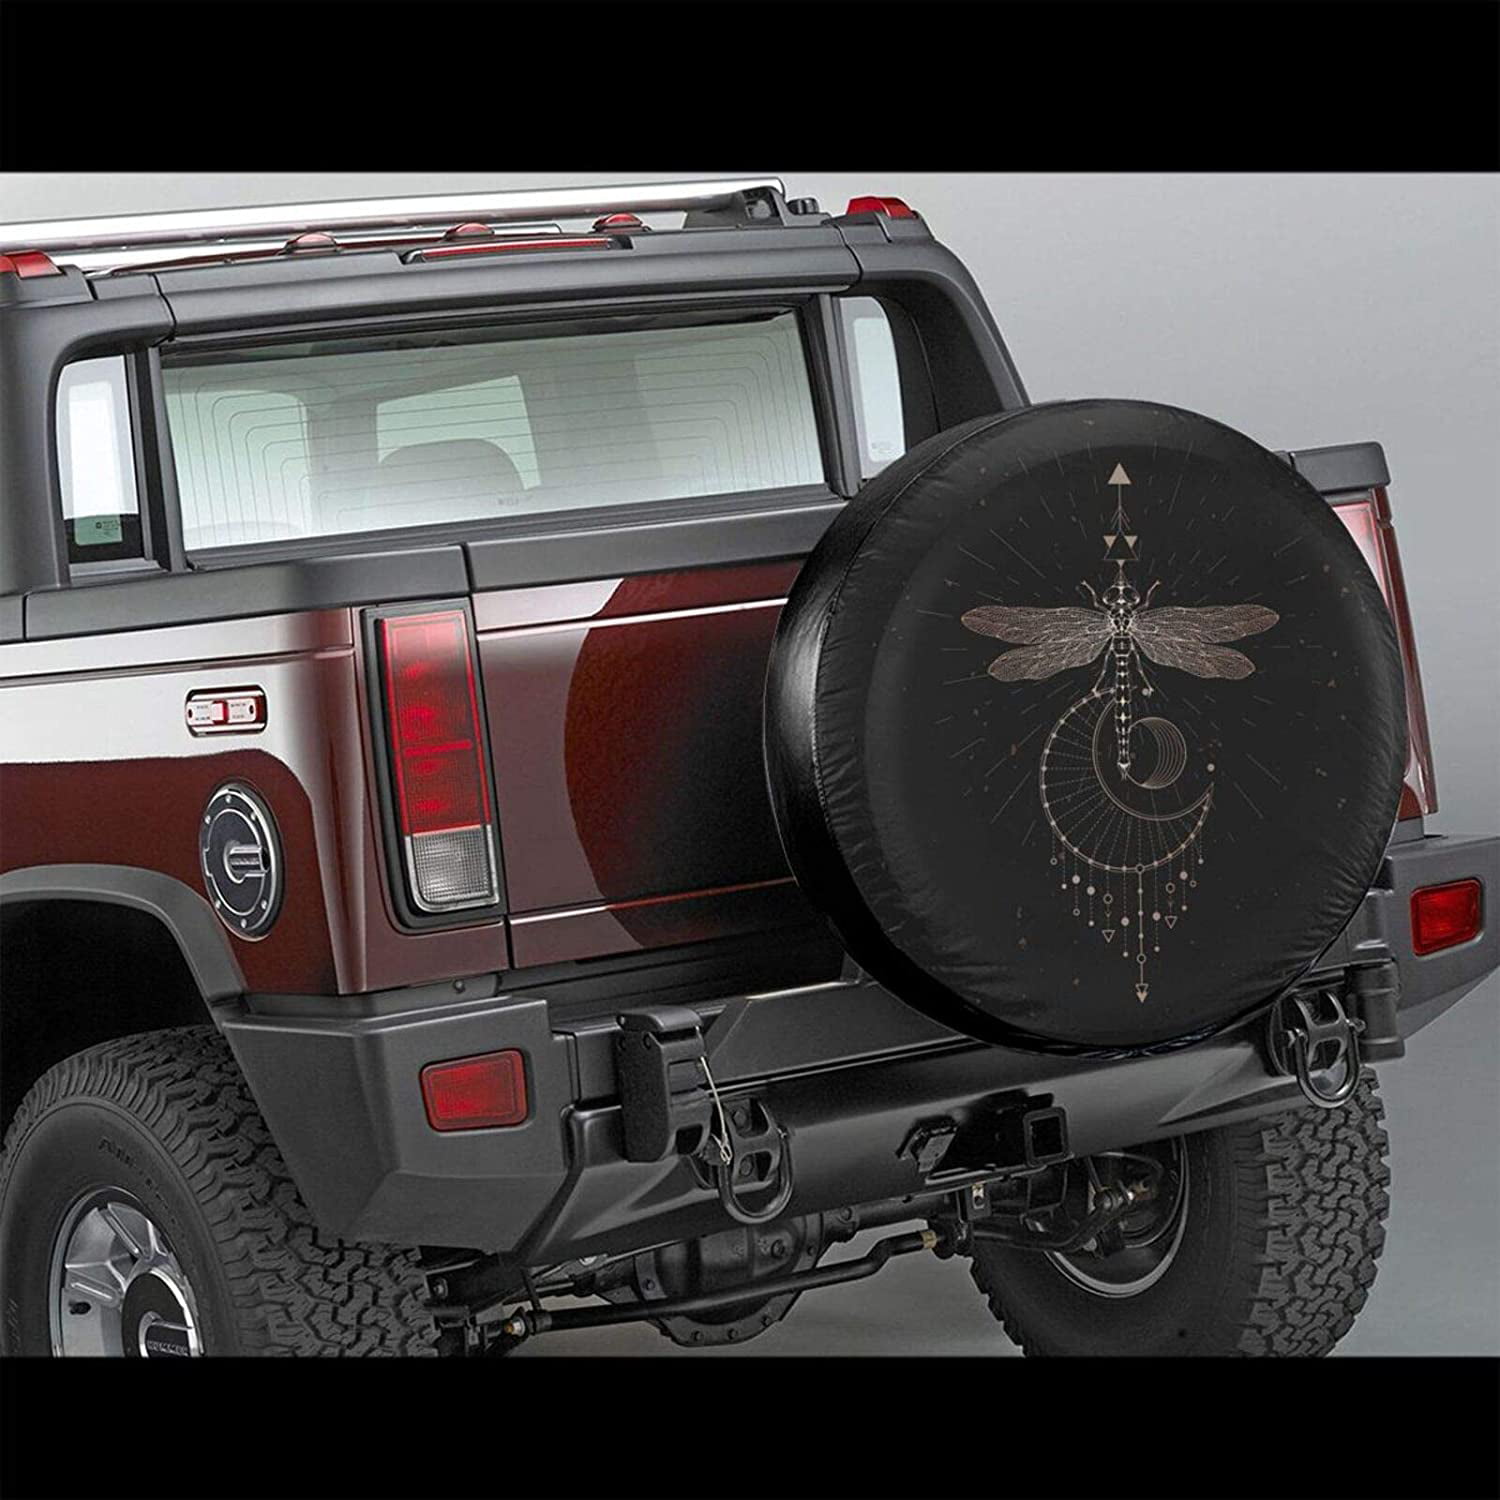 Dujiea Dragonfly Geometric Symbol Spare Tire Cover Universal Wheel Tire Cover Waterproof Dust-Proof Tire Protectors for Jeep Trailer Rv Van SUV Truck Camper and Many Vehicle 14 15 16 17 Inch 